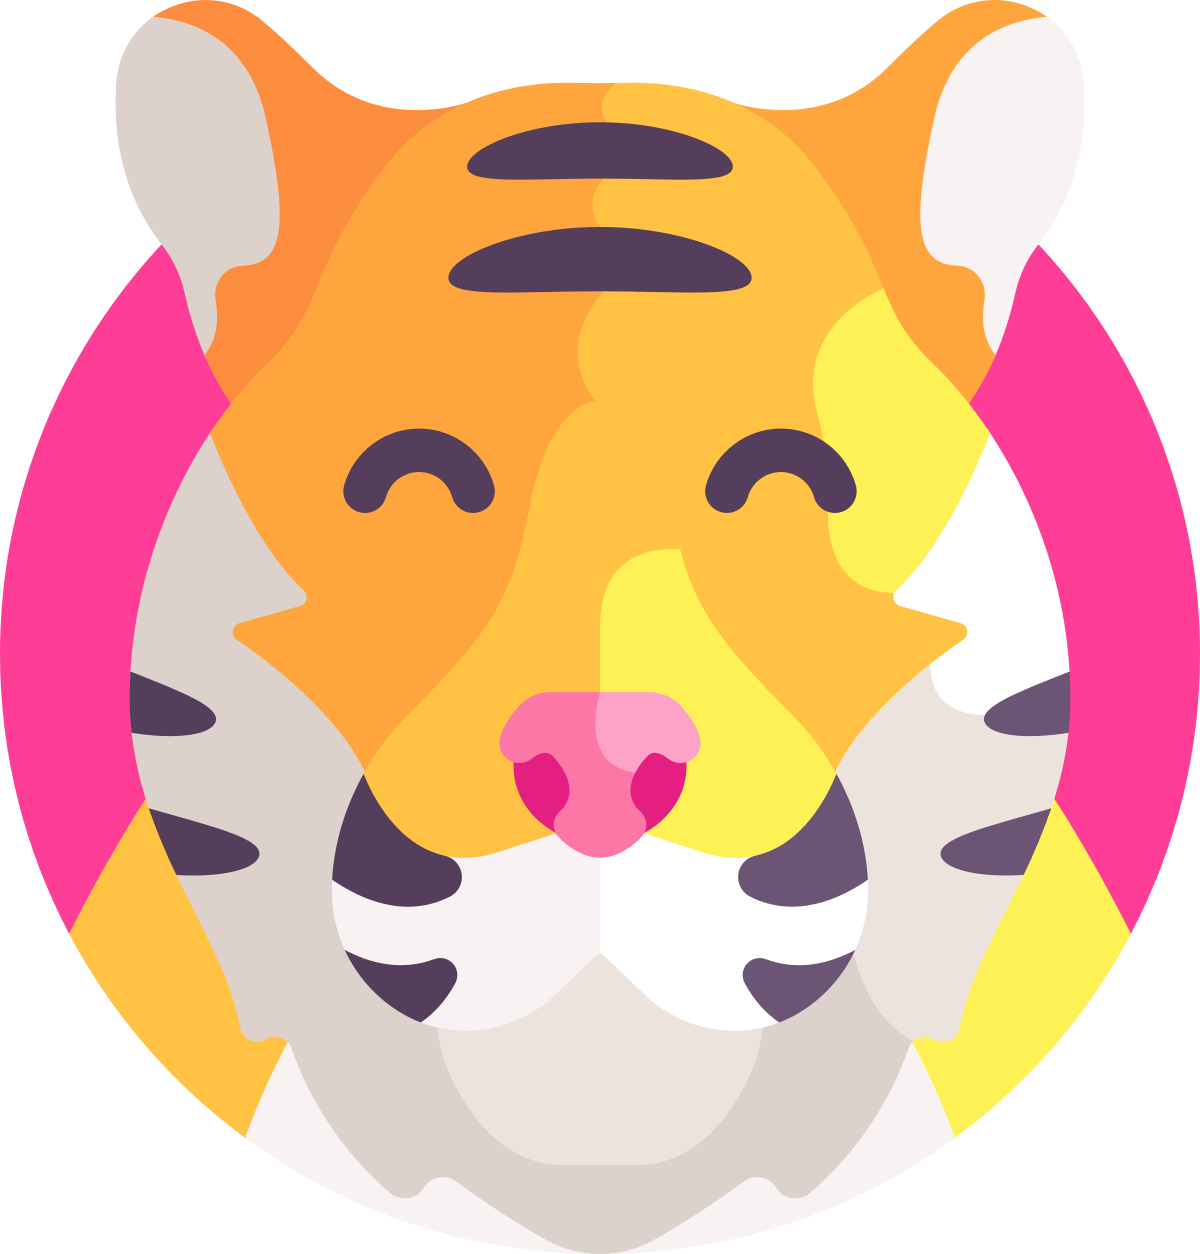 The Chinese horoscope for Tiger